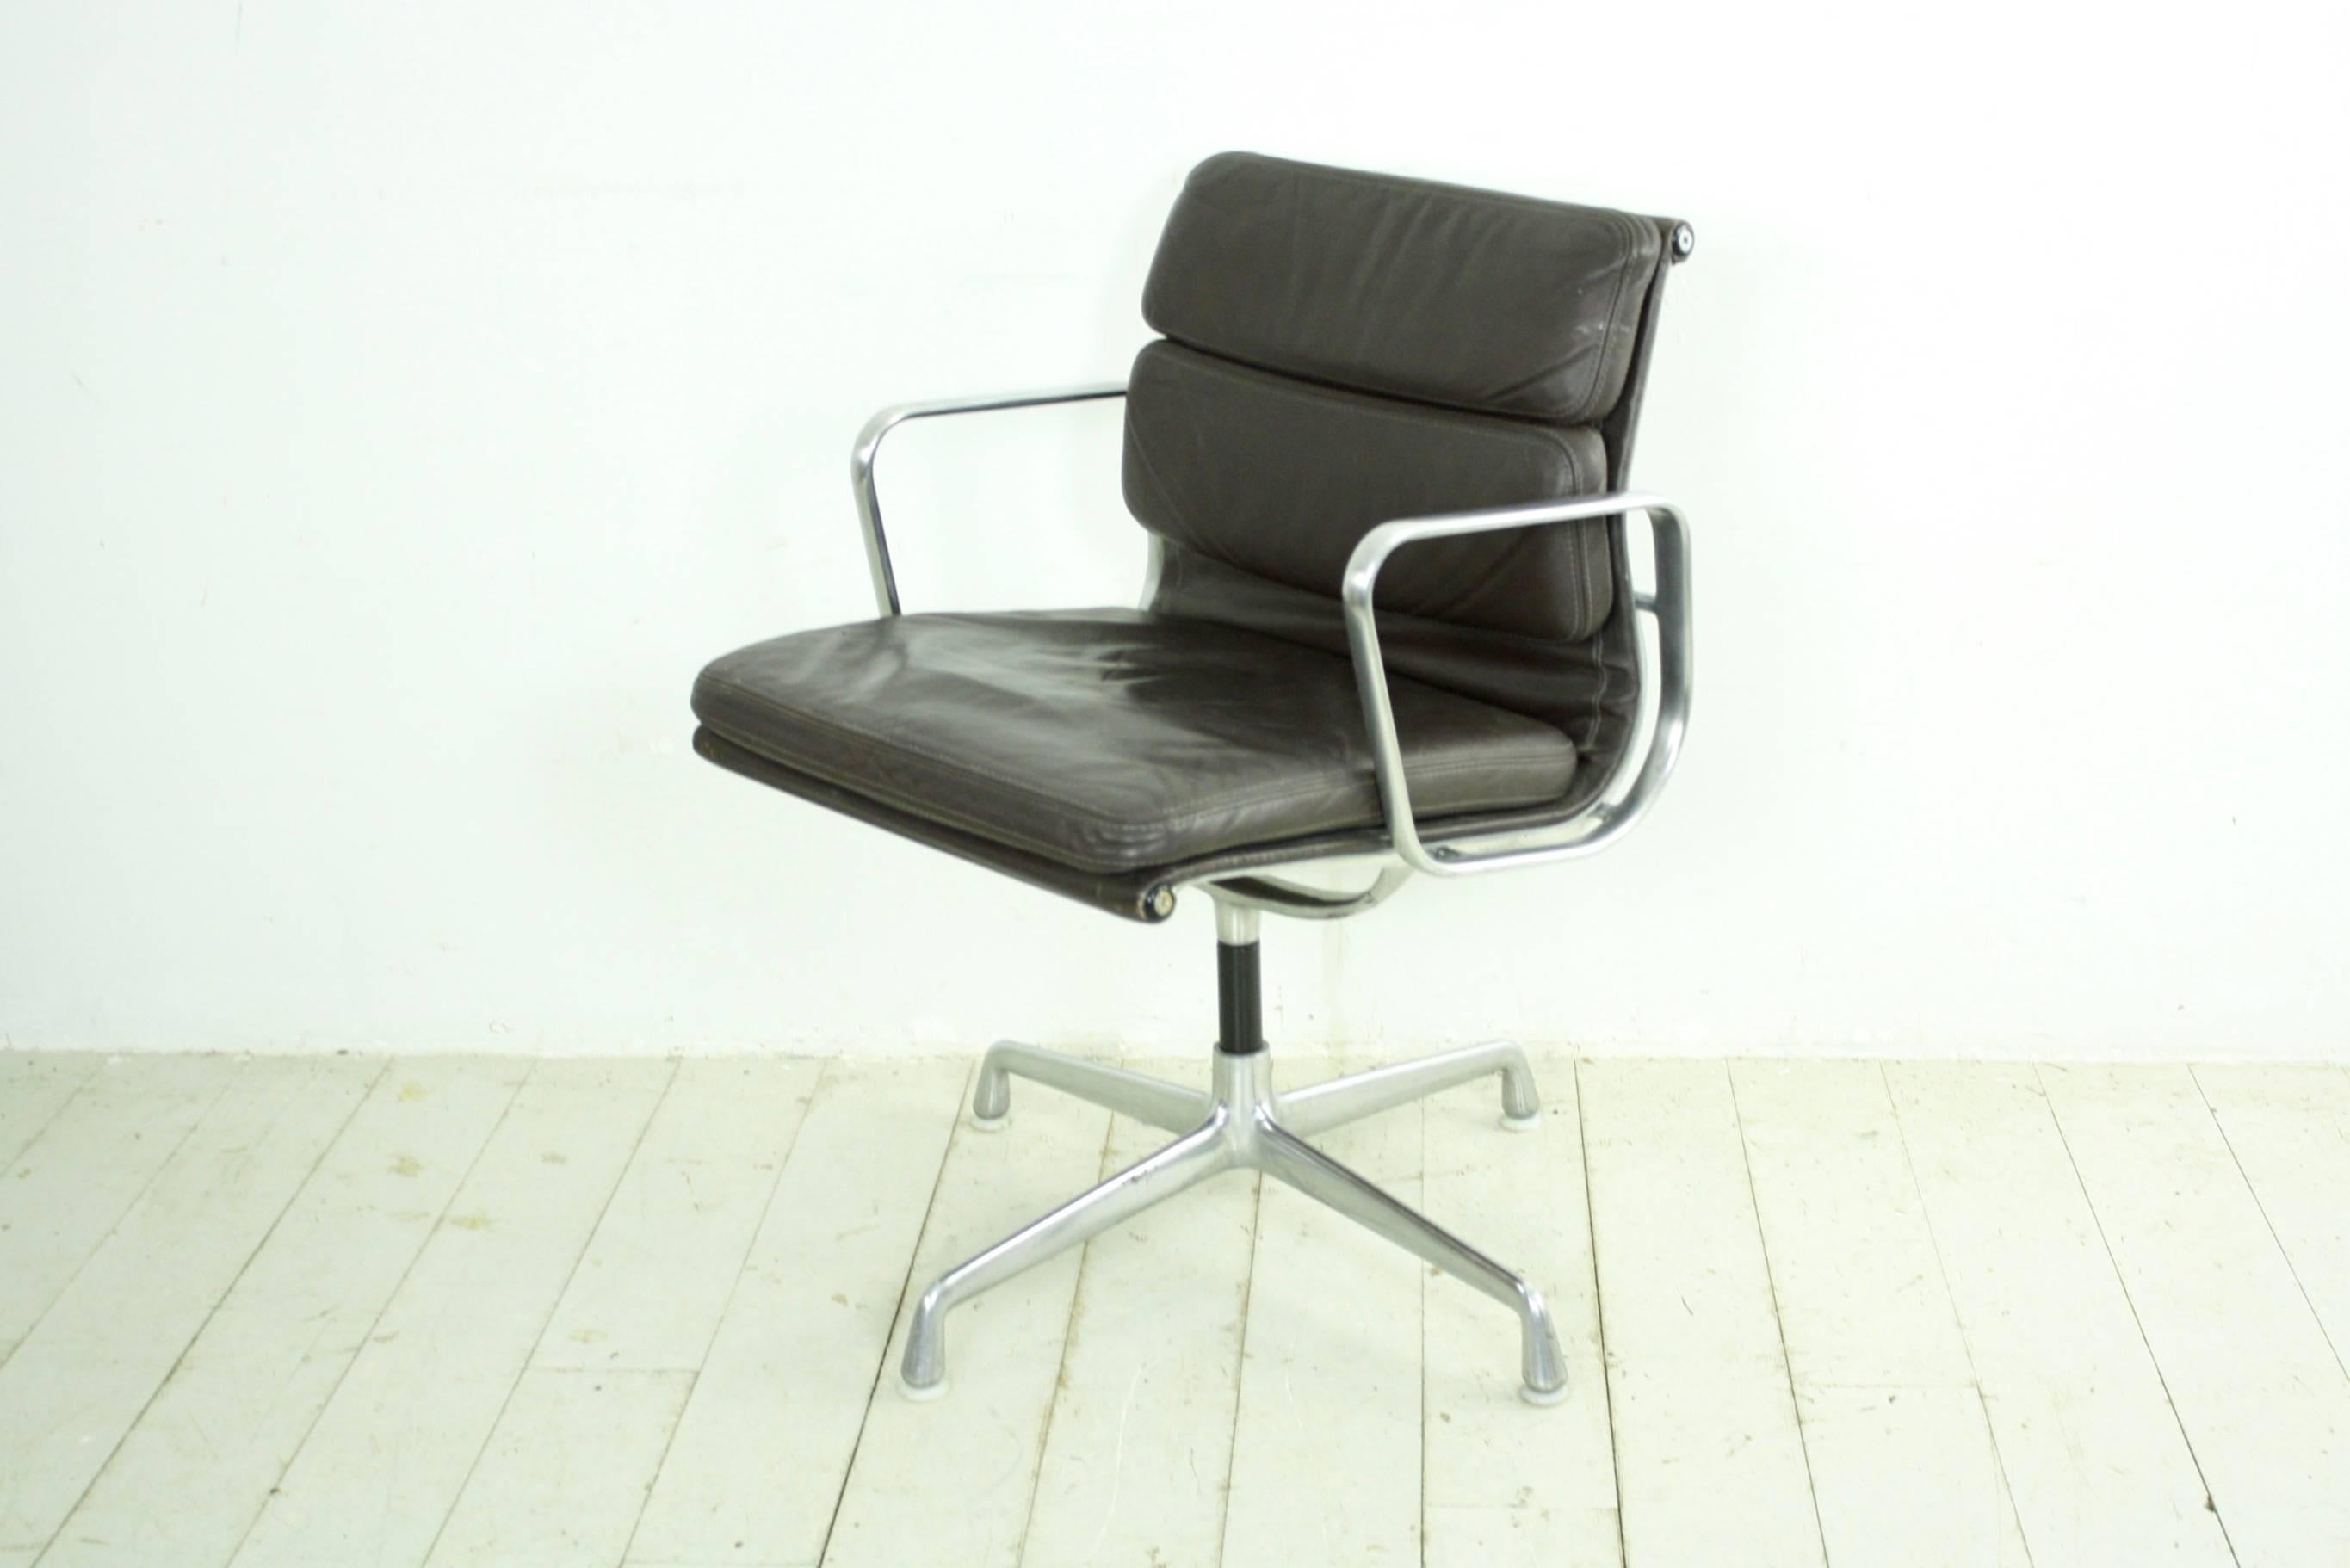 Vintage dark brown leather soft pad aluminum group chair designed by Charles and Ray Eames for Herman Miller.

In overall good vintage condition. The leather is soft and clean with no holes or tears. There is some age-related wear and scuffing on